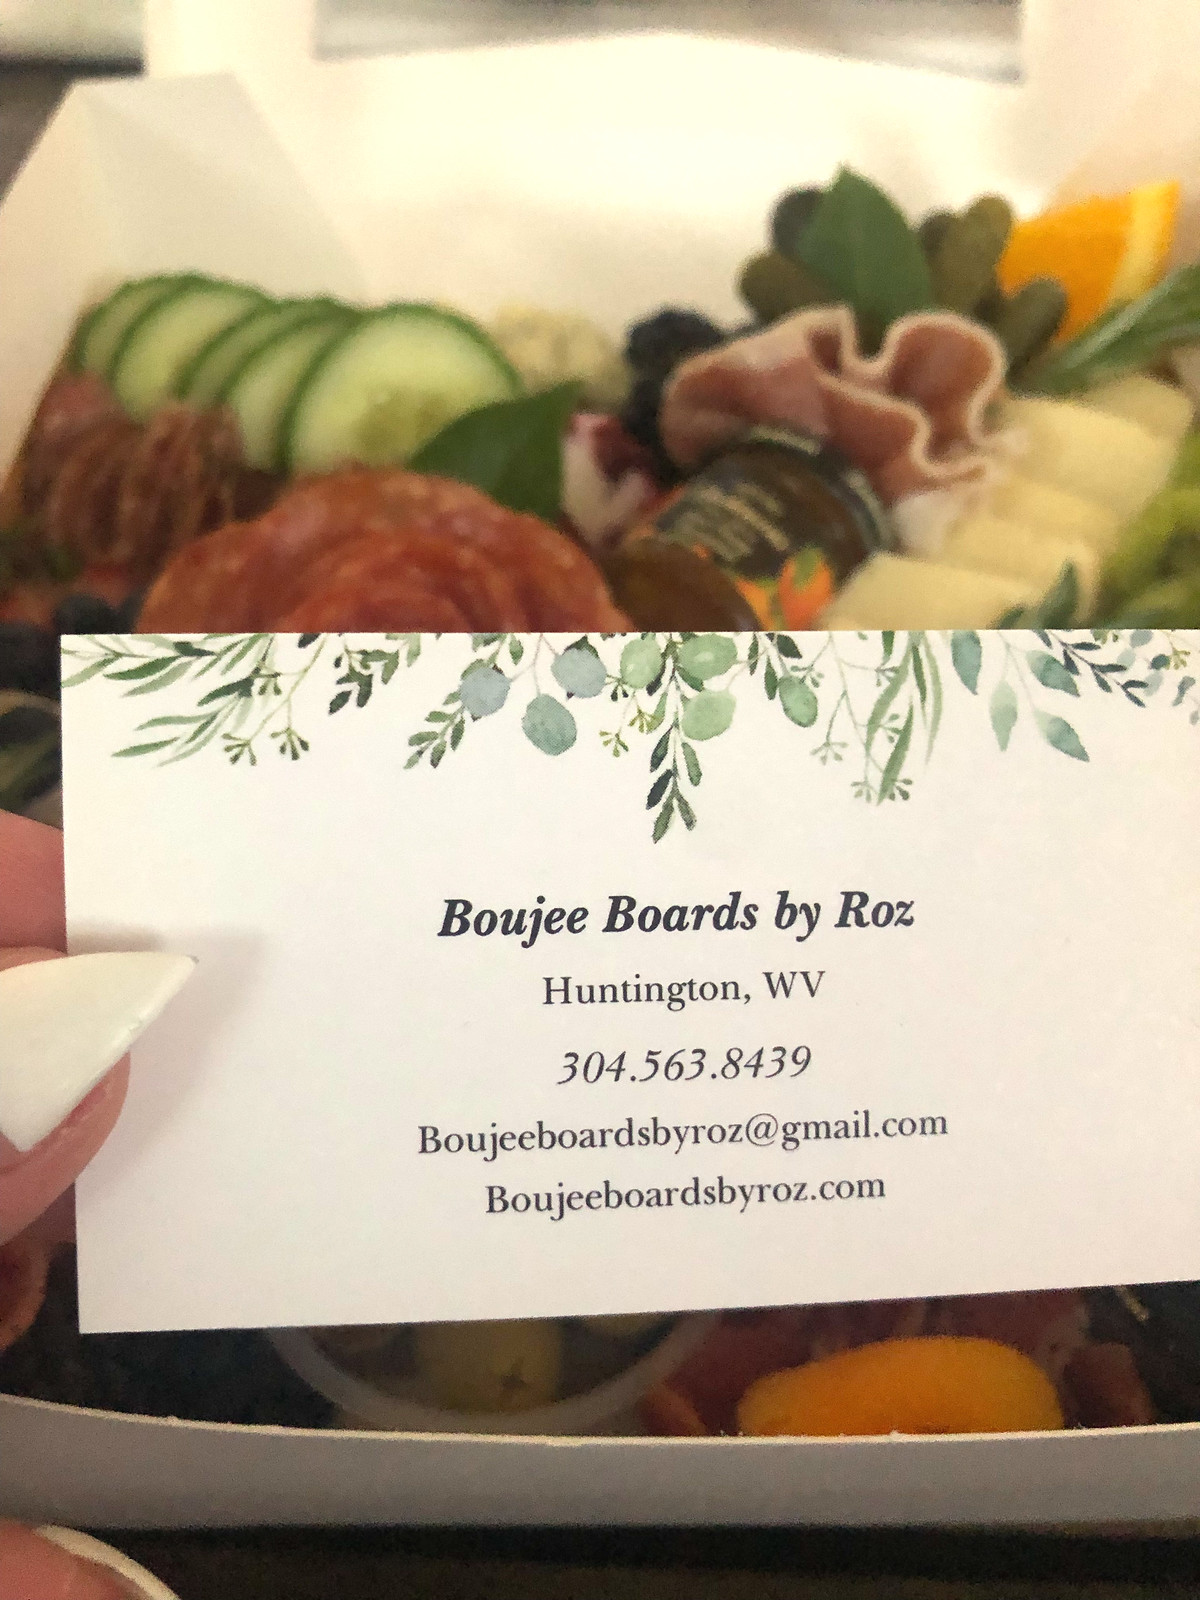 Boujee boards by Roz